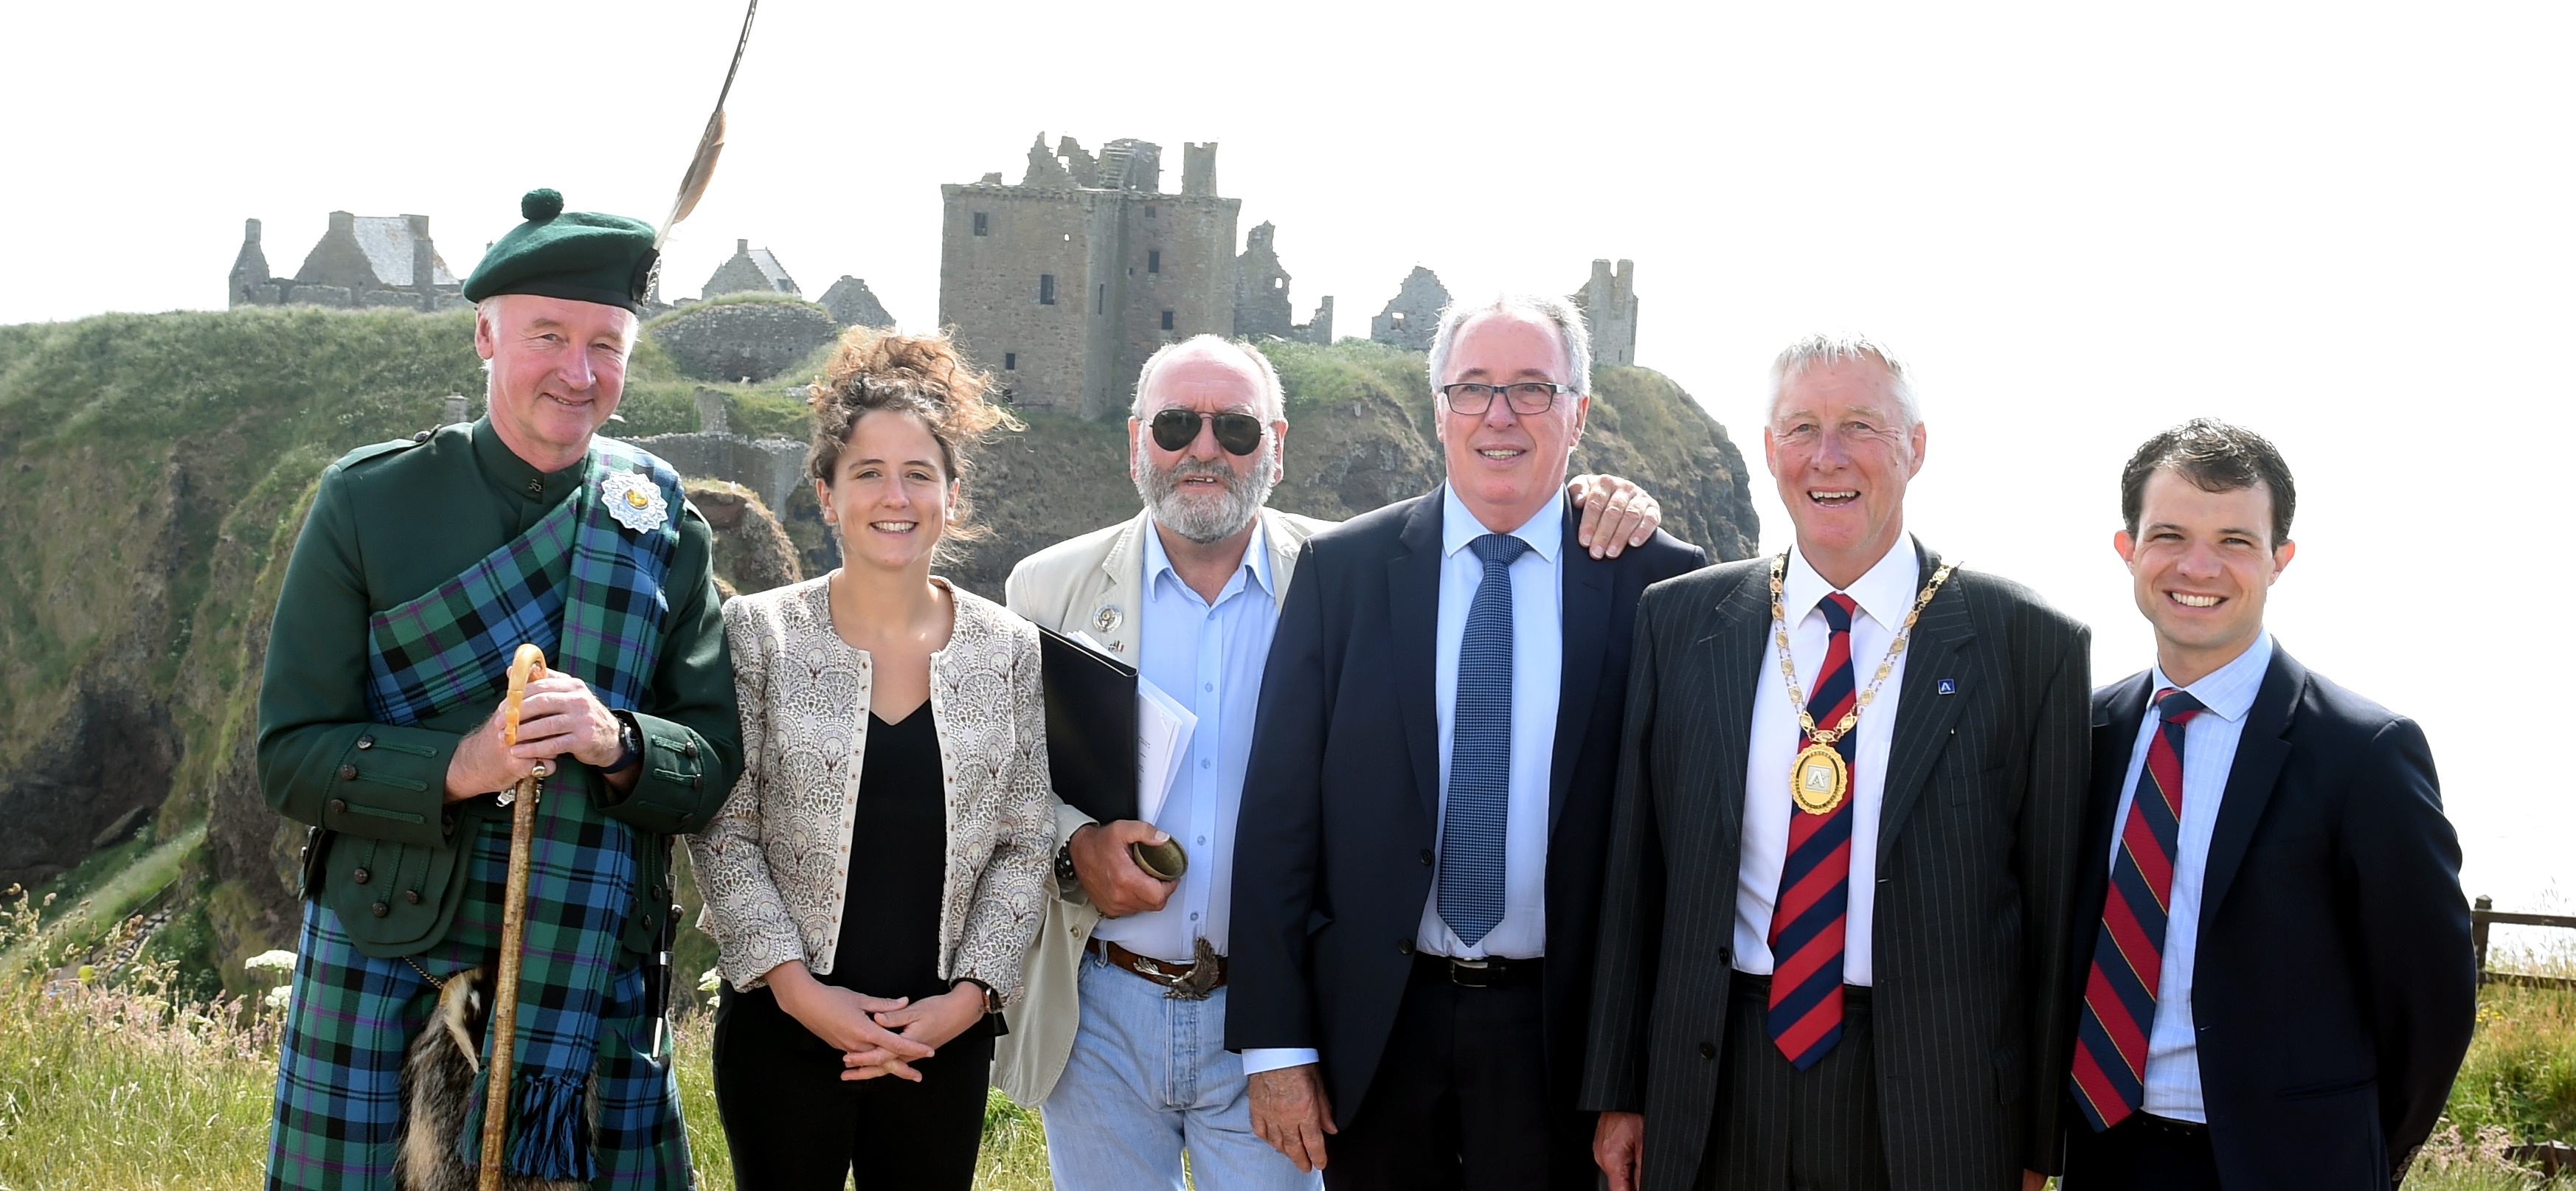 The French town of Acheres, twinning committee visited Stonehaven and the Dunnottar castle. In the picture are members of both committe's. From left are Richard Holman-Baird, Mairi Gougeon, Phil Mills-Bishop, Marc Honore, Mayor of Acheres: provost, Bill Howatson and Andrew Bowie. 
Picture by Jim Irvine  7-7-18